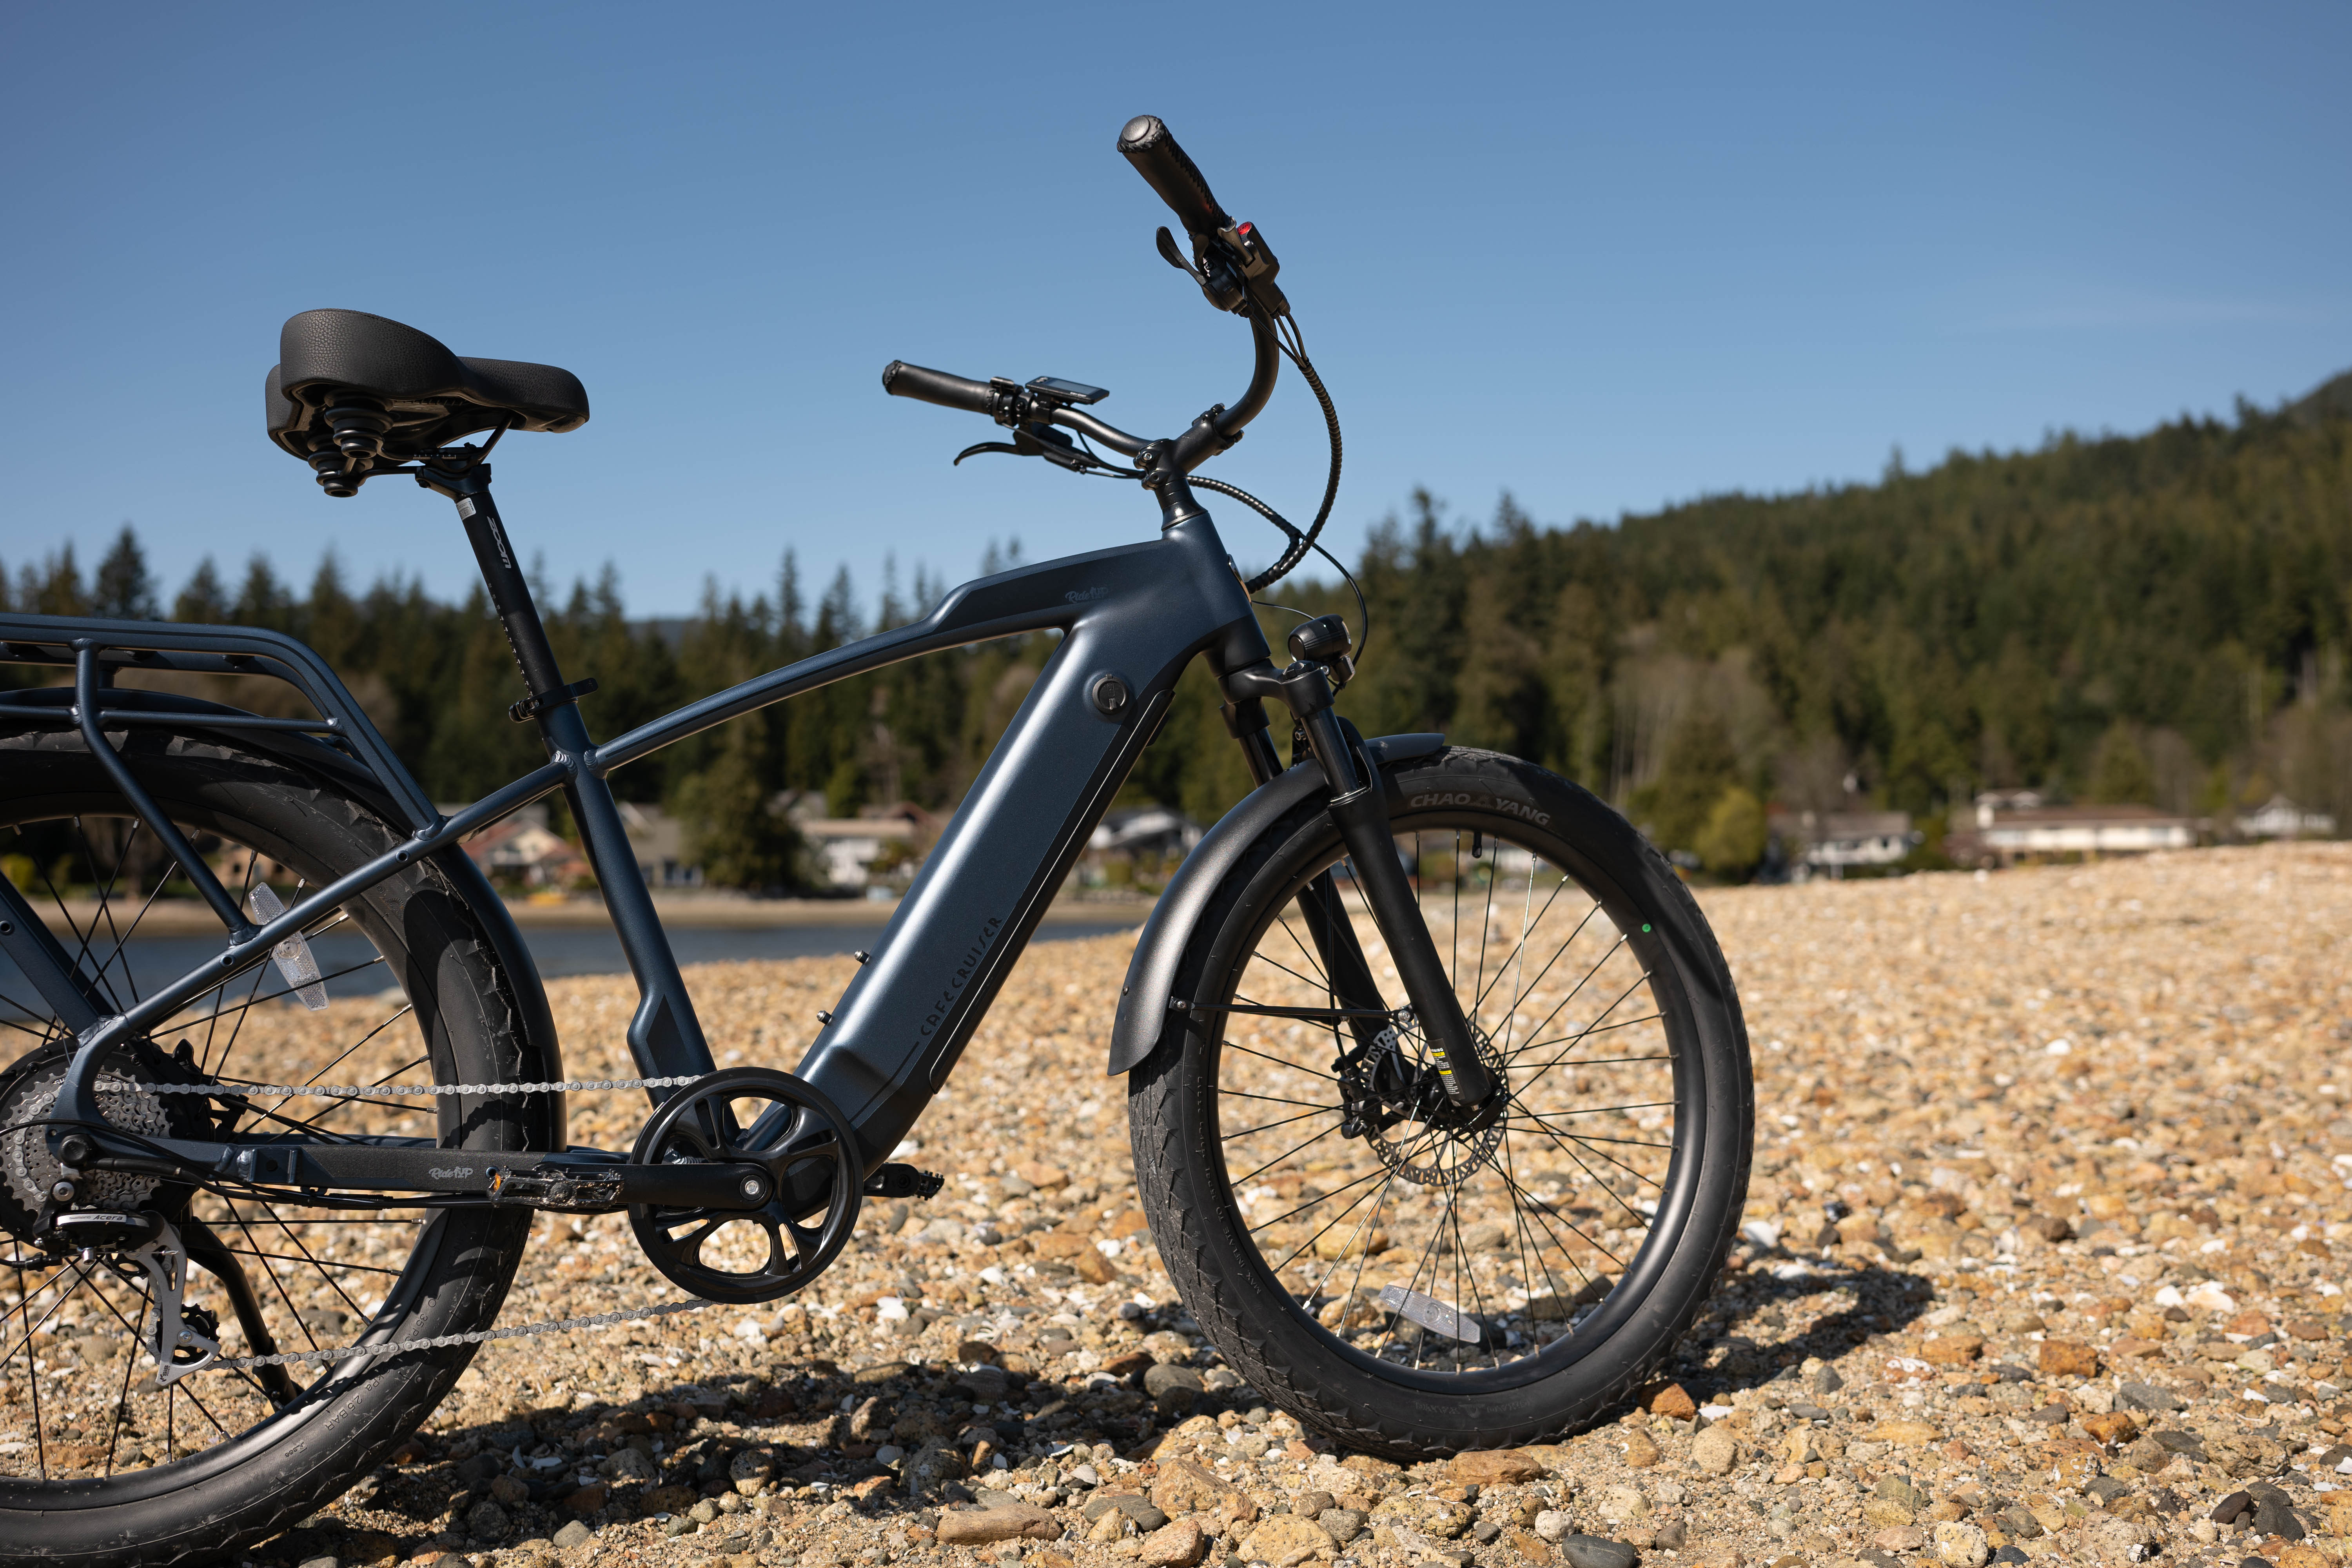 First Ride: Vintage's Newest E-Bikes Can Hit Speeds Up to 40 MPH